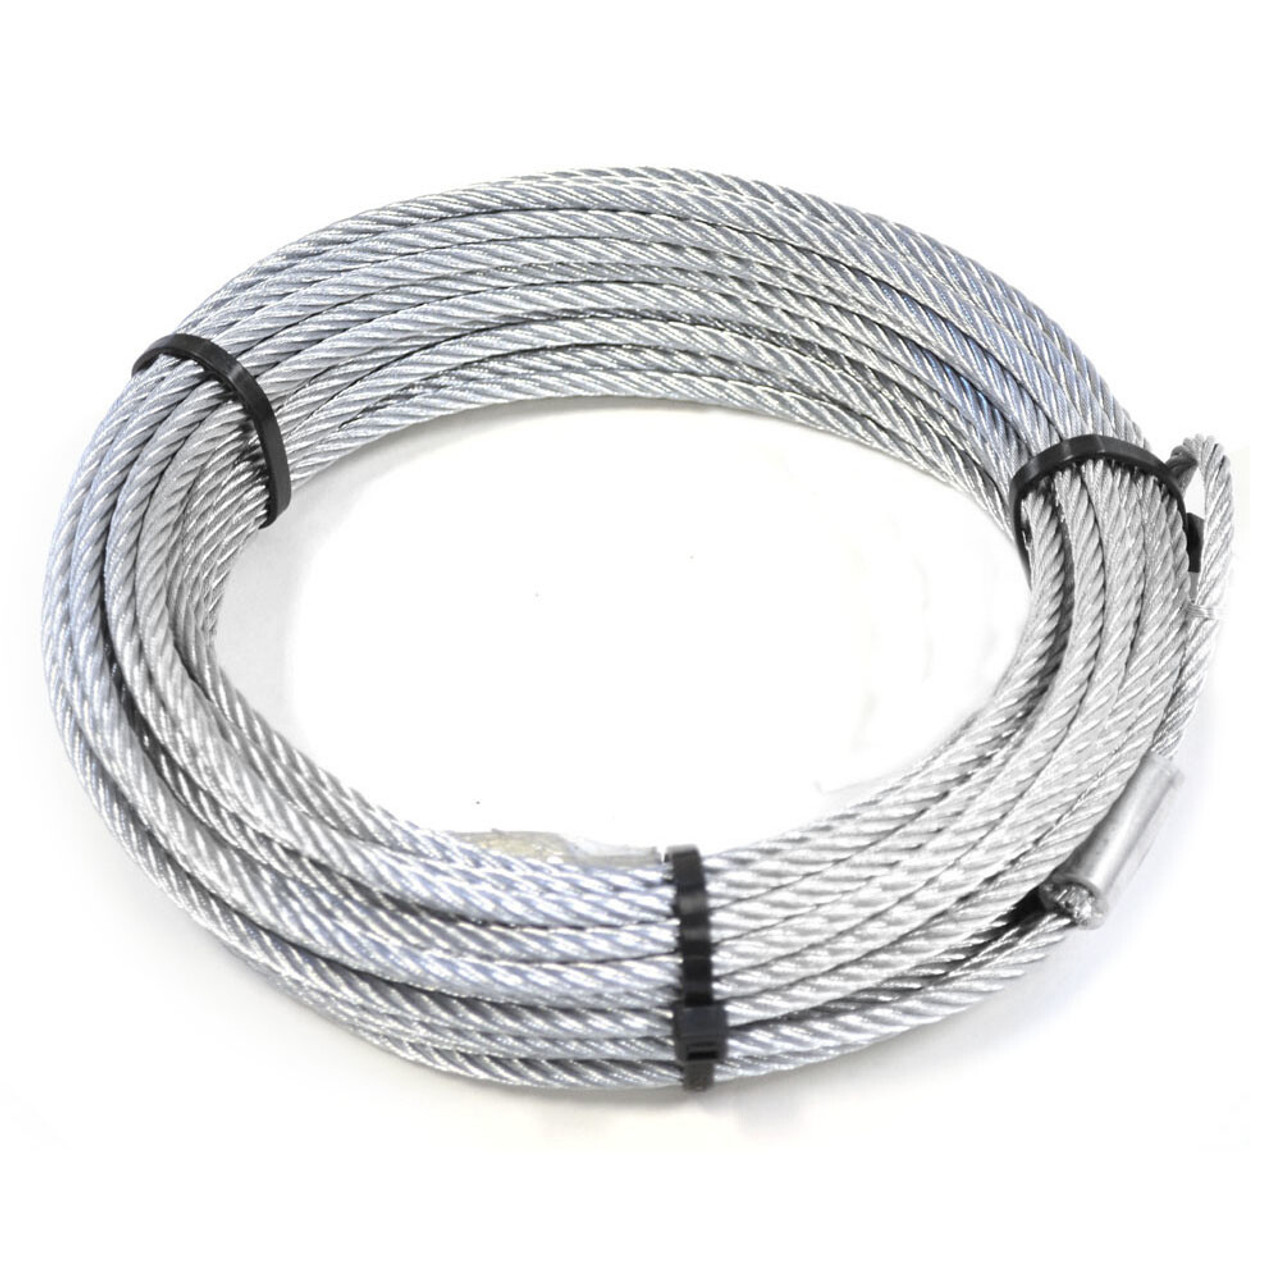 Warn New Winch Replacement Wire Rope, 61-1216